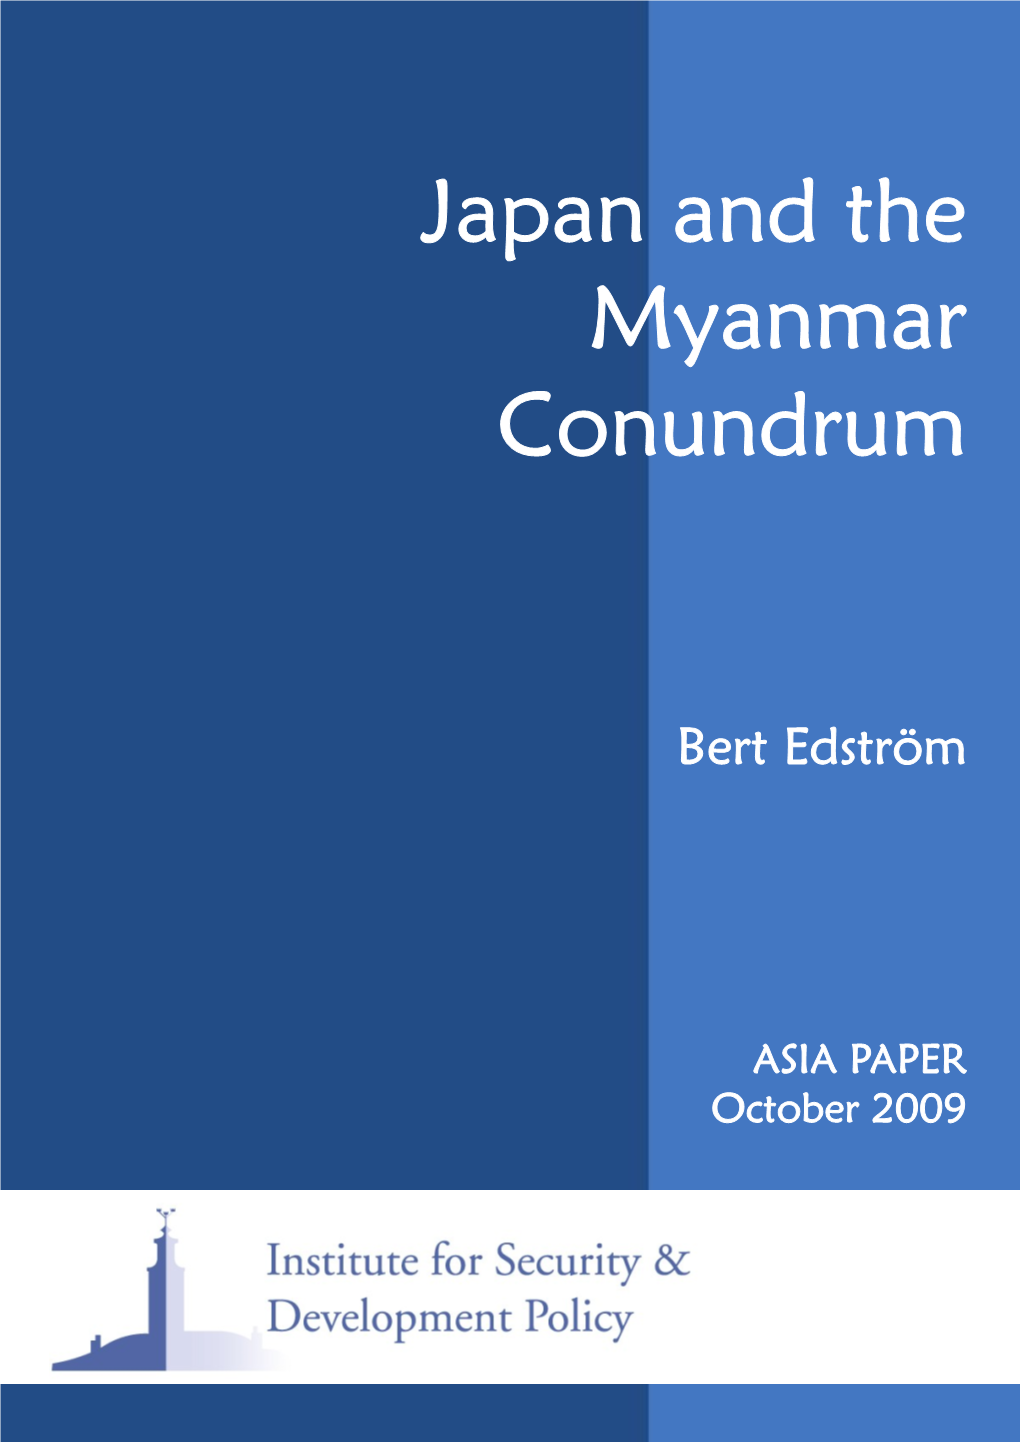 Japan and the Myanmar Conundrum